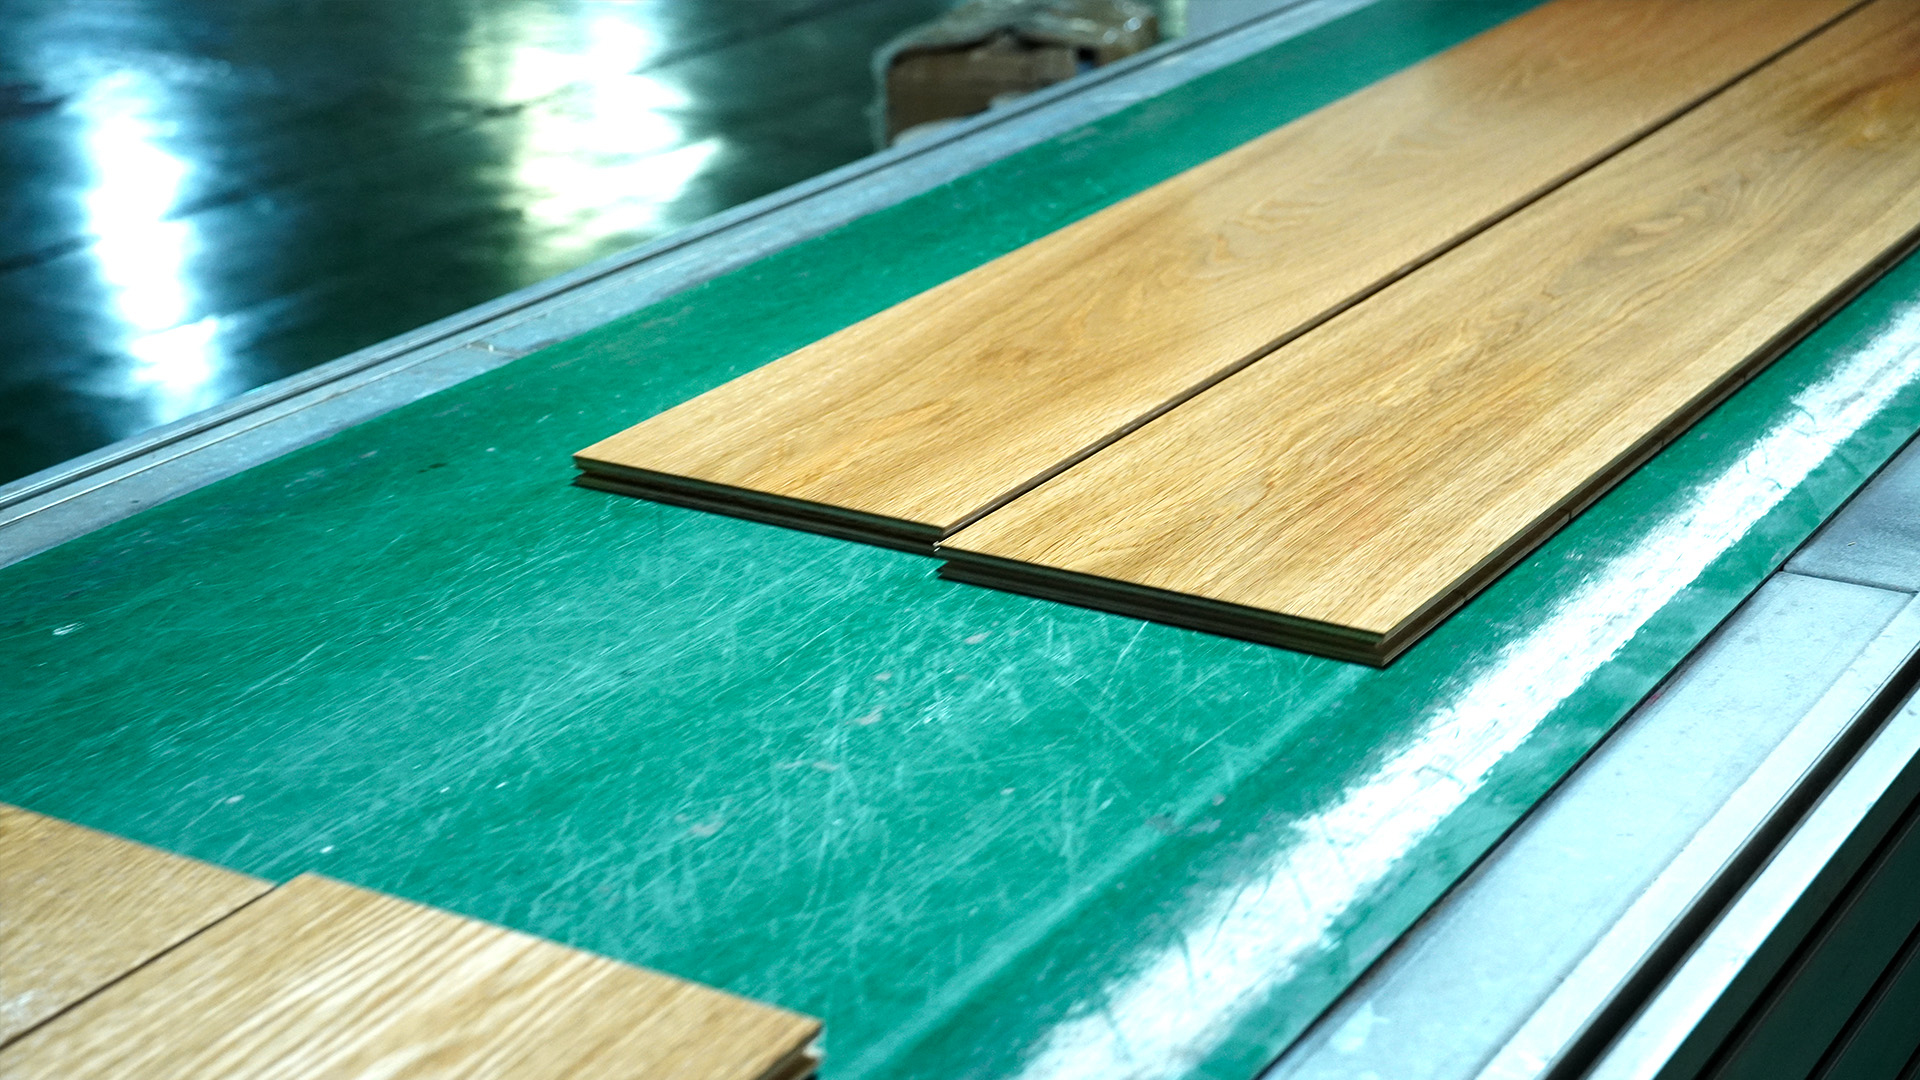 5 Bevel Styles Of Engineered Wood Flooring in Our Factory - GOLINK